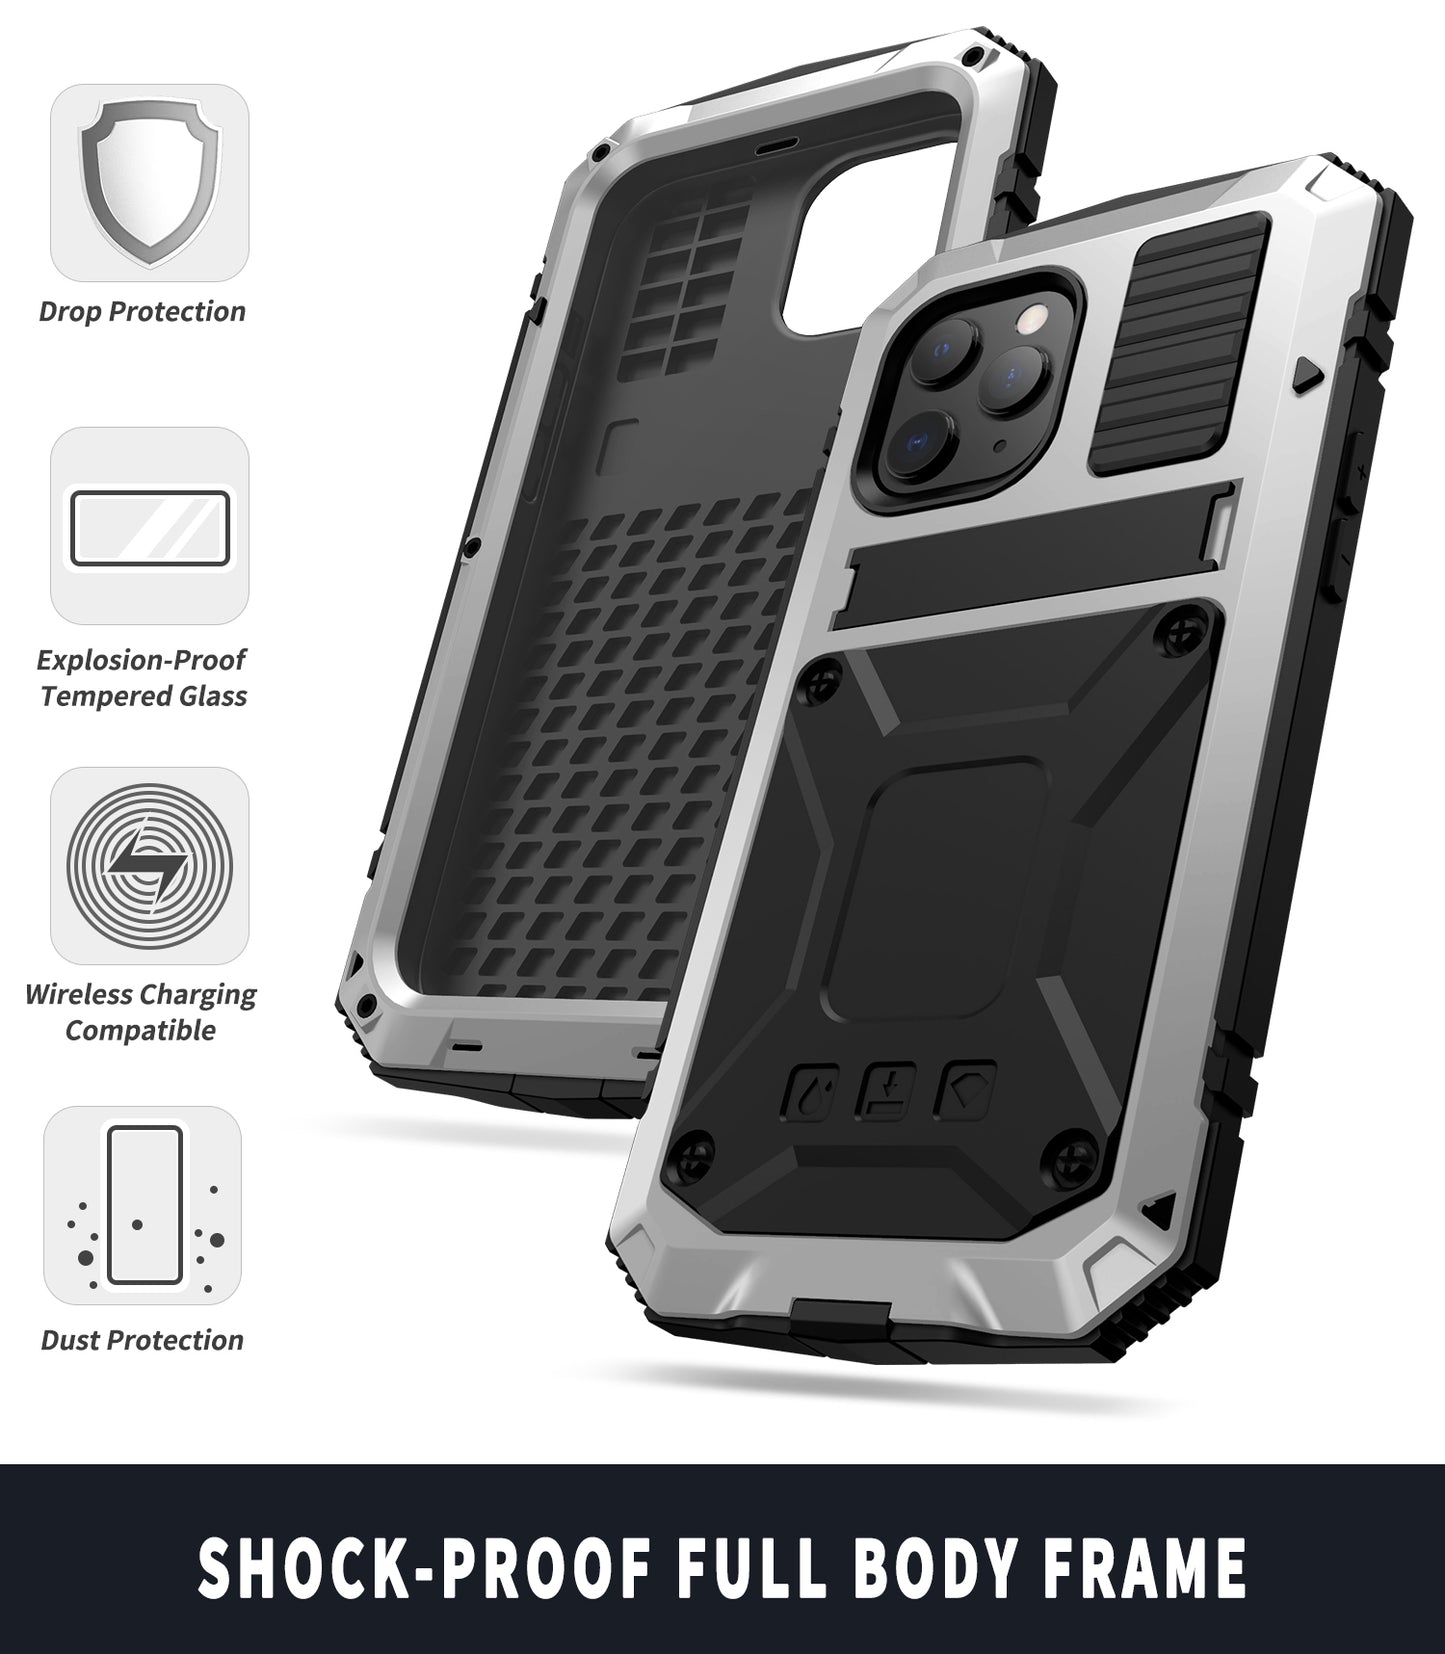 Metal Vajra iPhone 12 Case Shockproof Stand Strap Outdoor Sports Full Protection